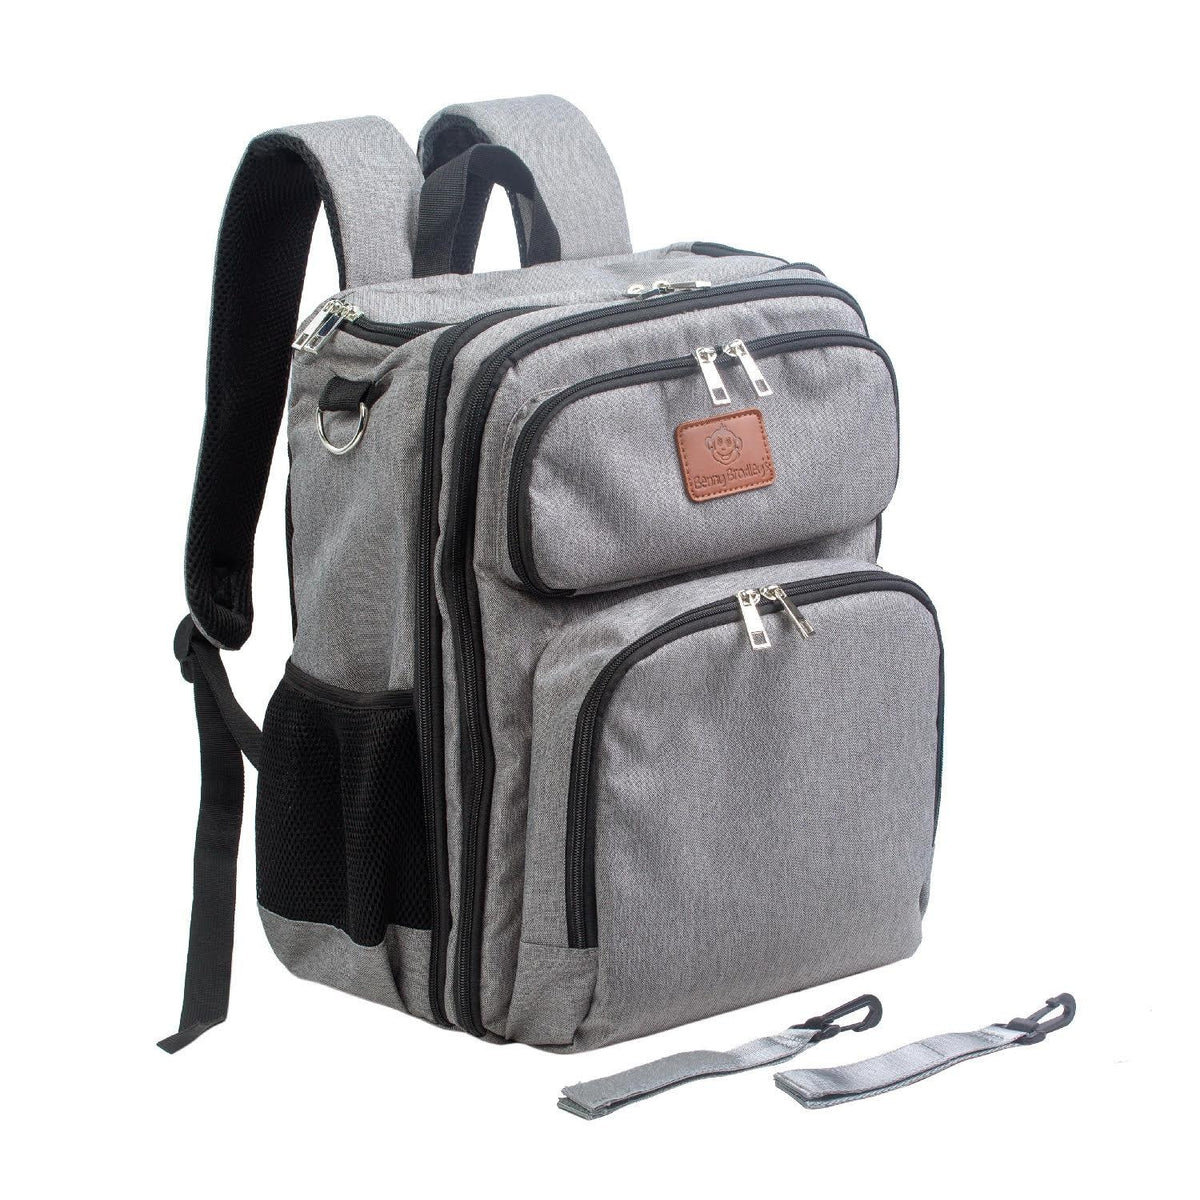 Premium Quality Designer Diaper Bag Backpack - Easily Connects to Strollers